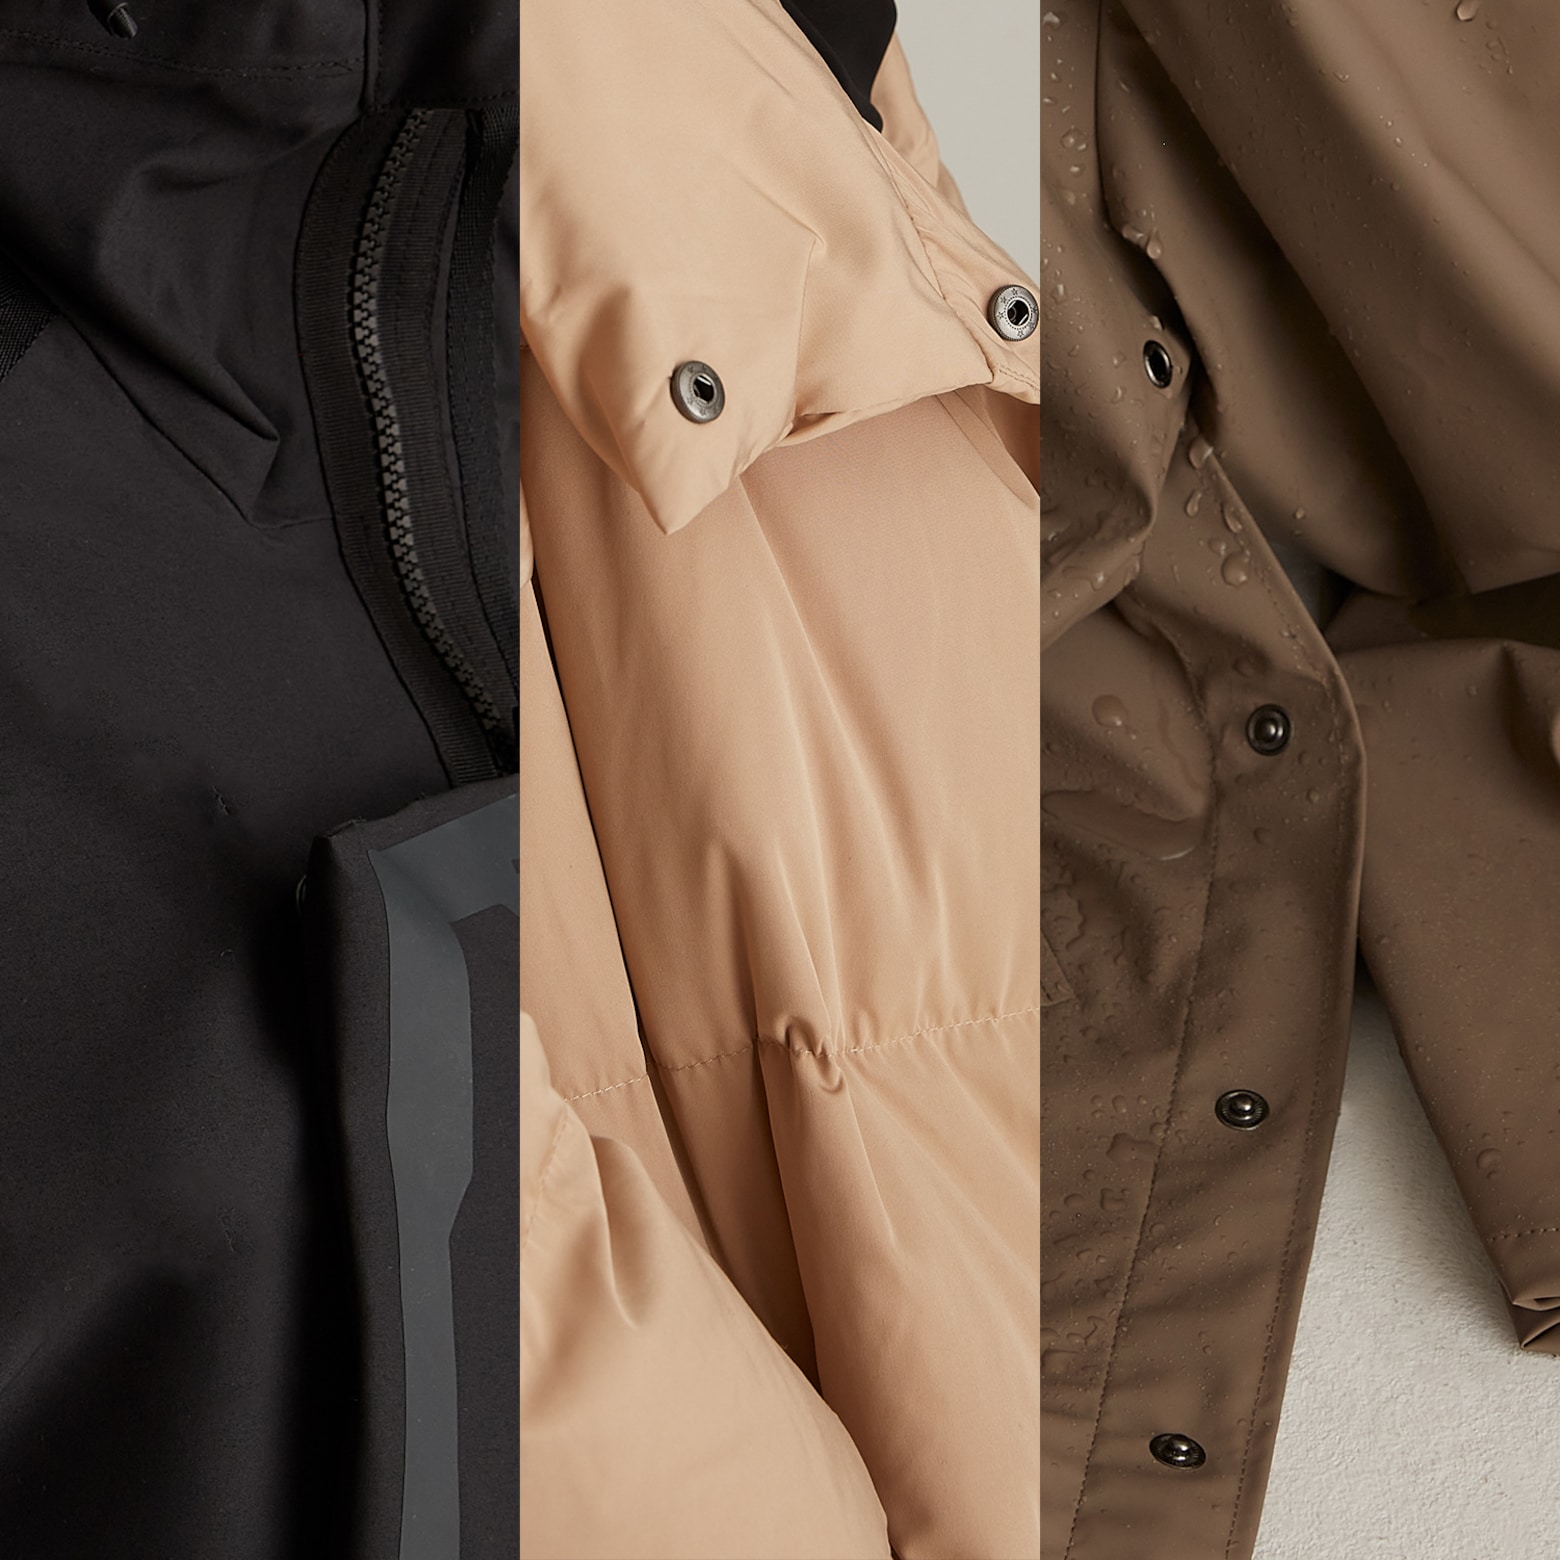 For jackets and coats A material guide